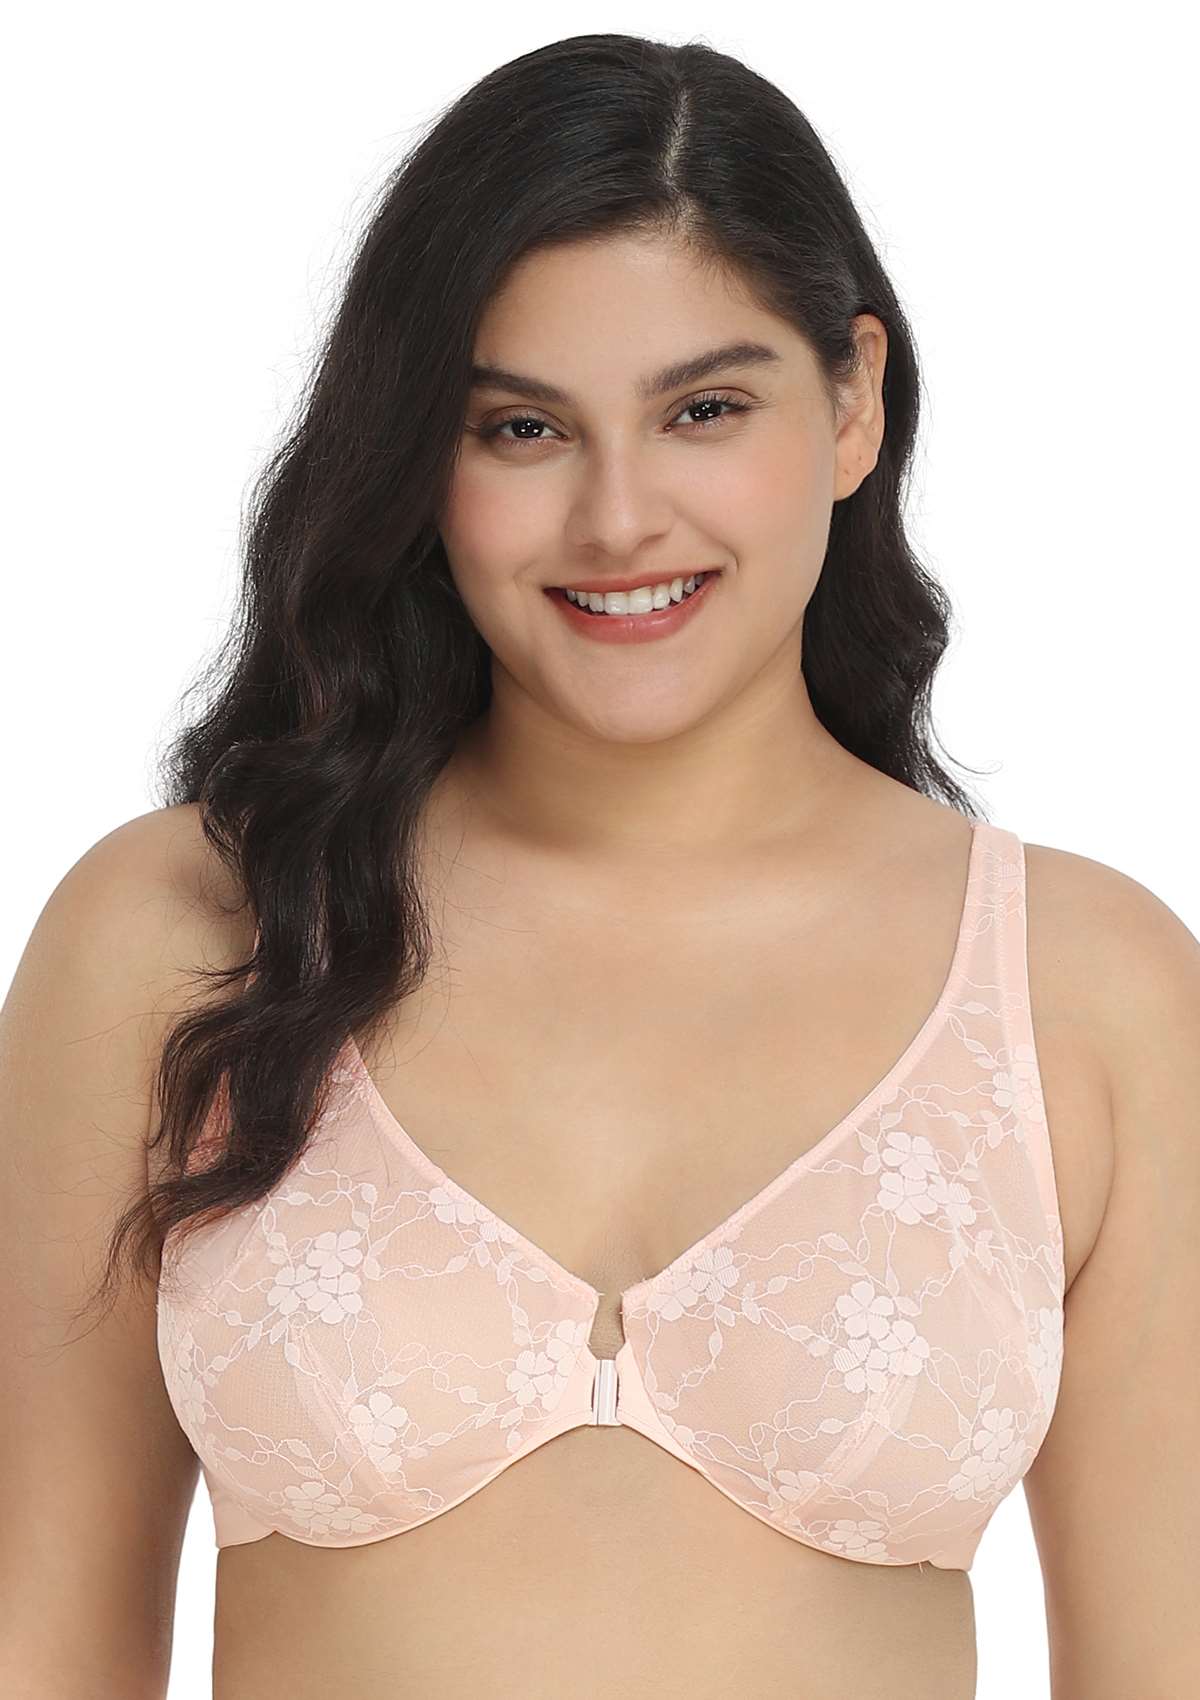 HSIA Spring Romance Front-Close Floral Lace Unlined Full Coverage Bra - White / 34 / D